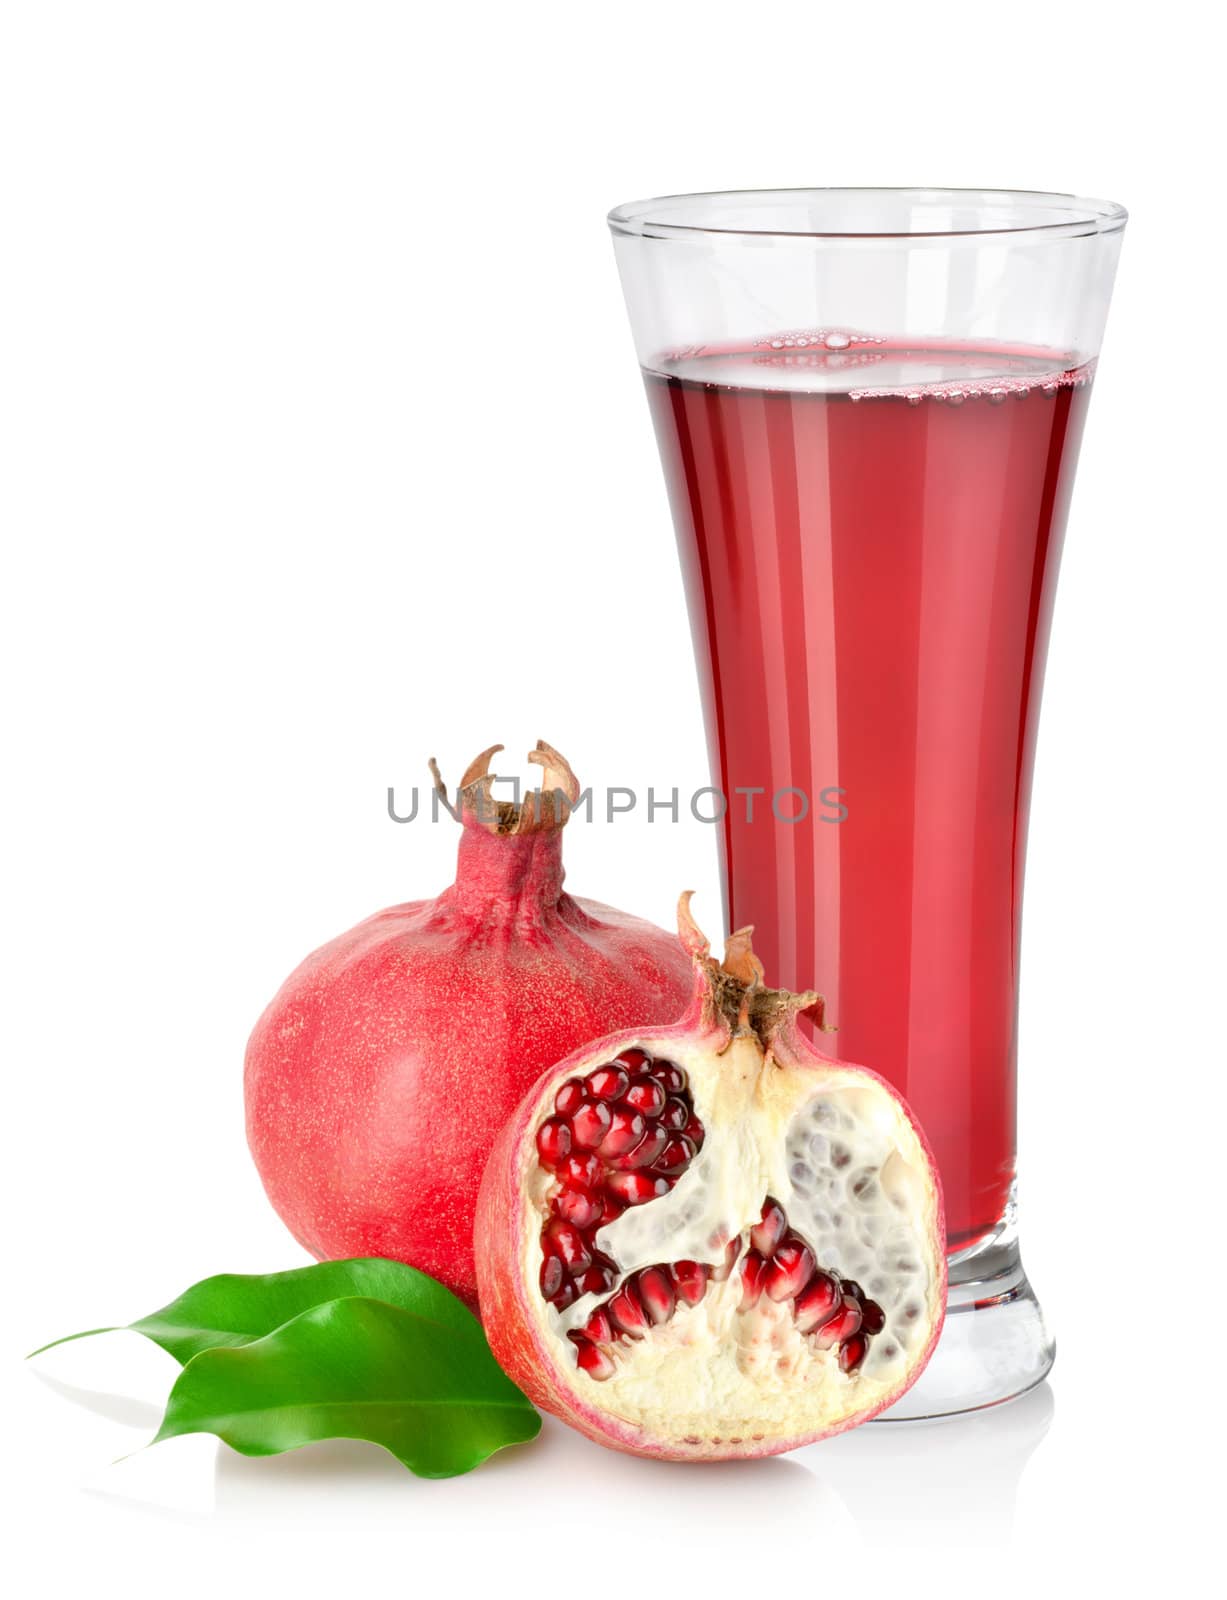 Pomegranate and glass by Givaga